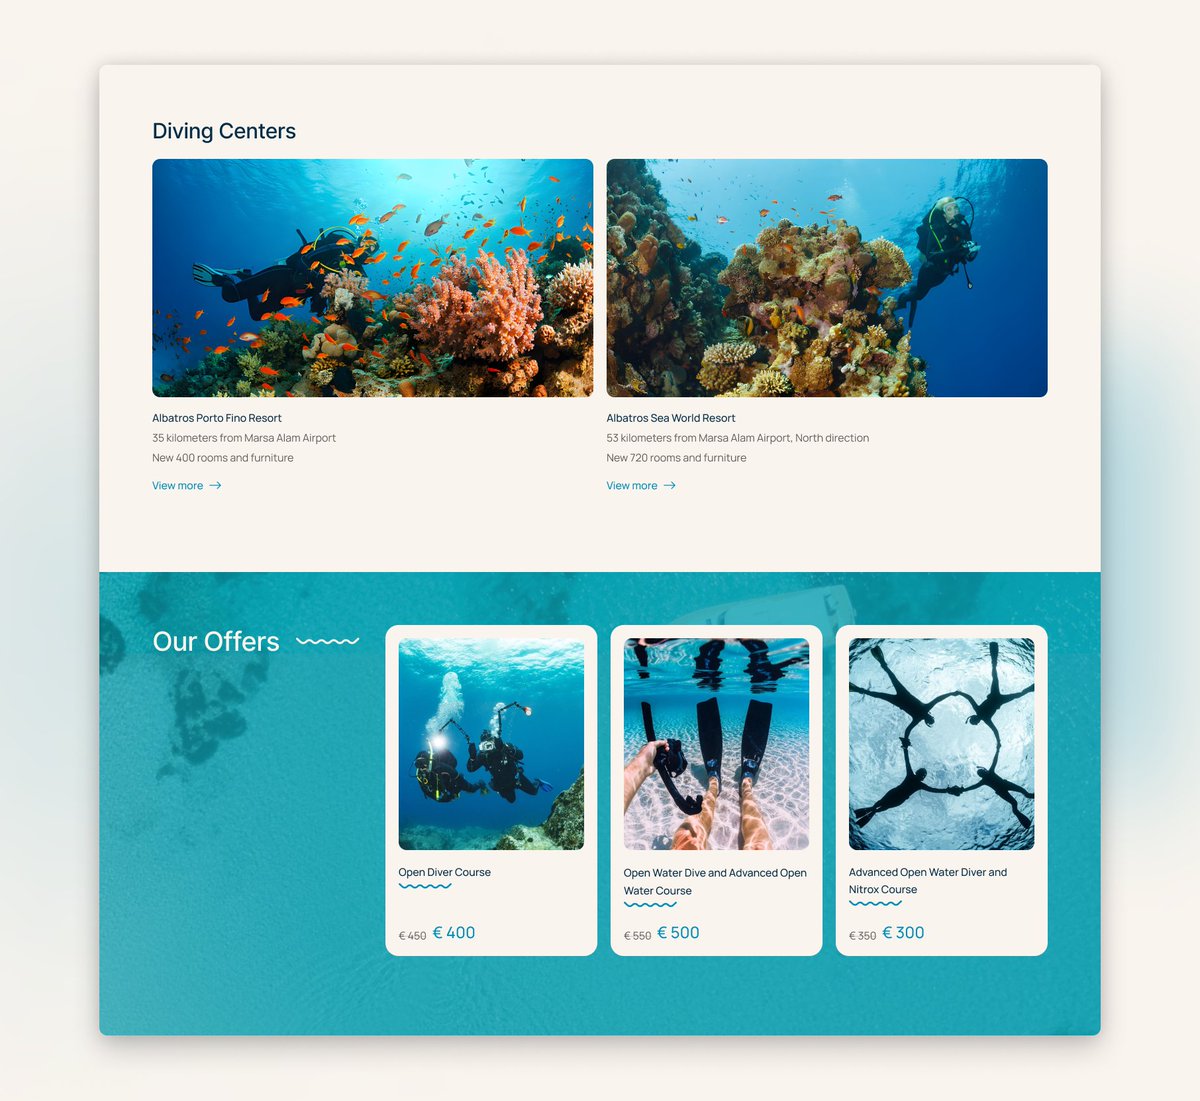 I believe UI/UX design should be intentional and tell a compelling brand narrative. Here's a section from the landing page for a Red Sea diving center I worked on. To showcase the beauty of the Red Sea, vibrant colors and underwater imagery were key. #UIUXDesign #WebDesign